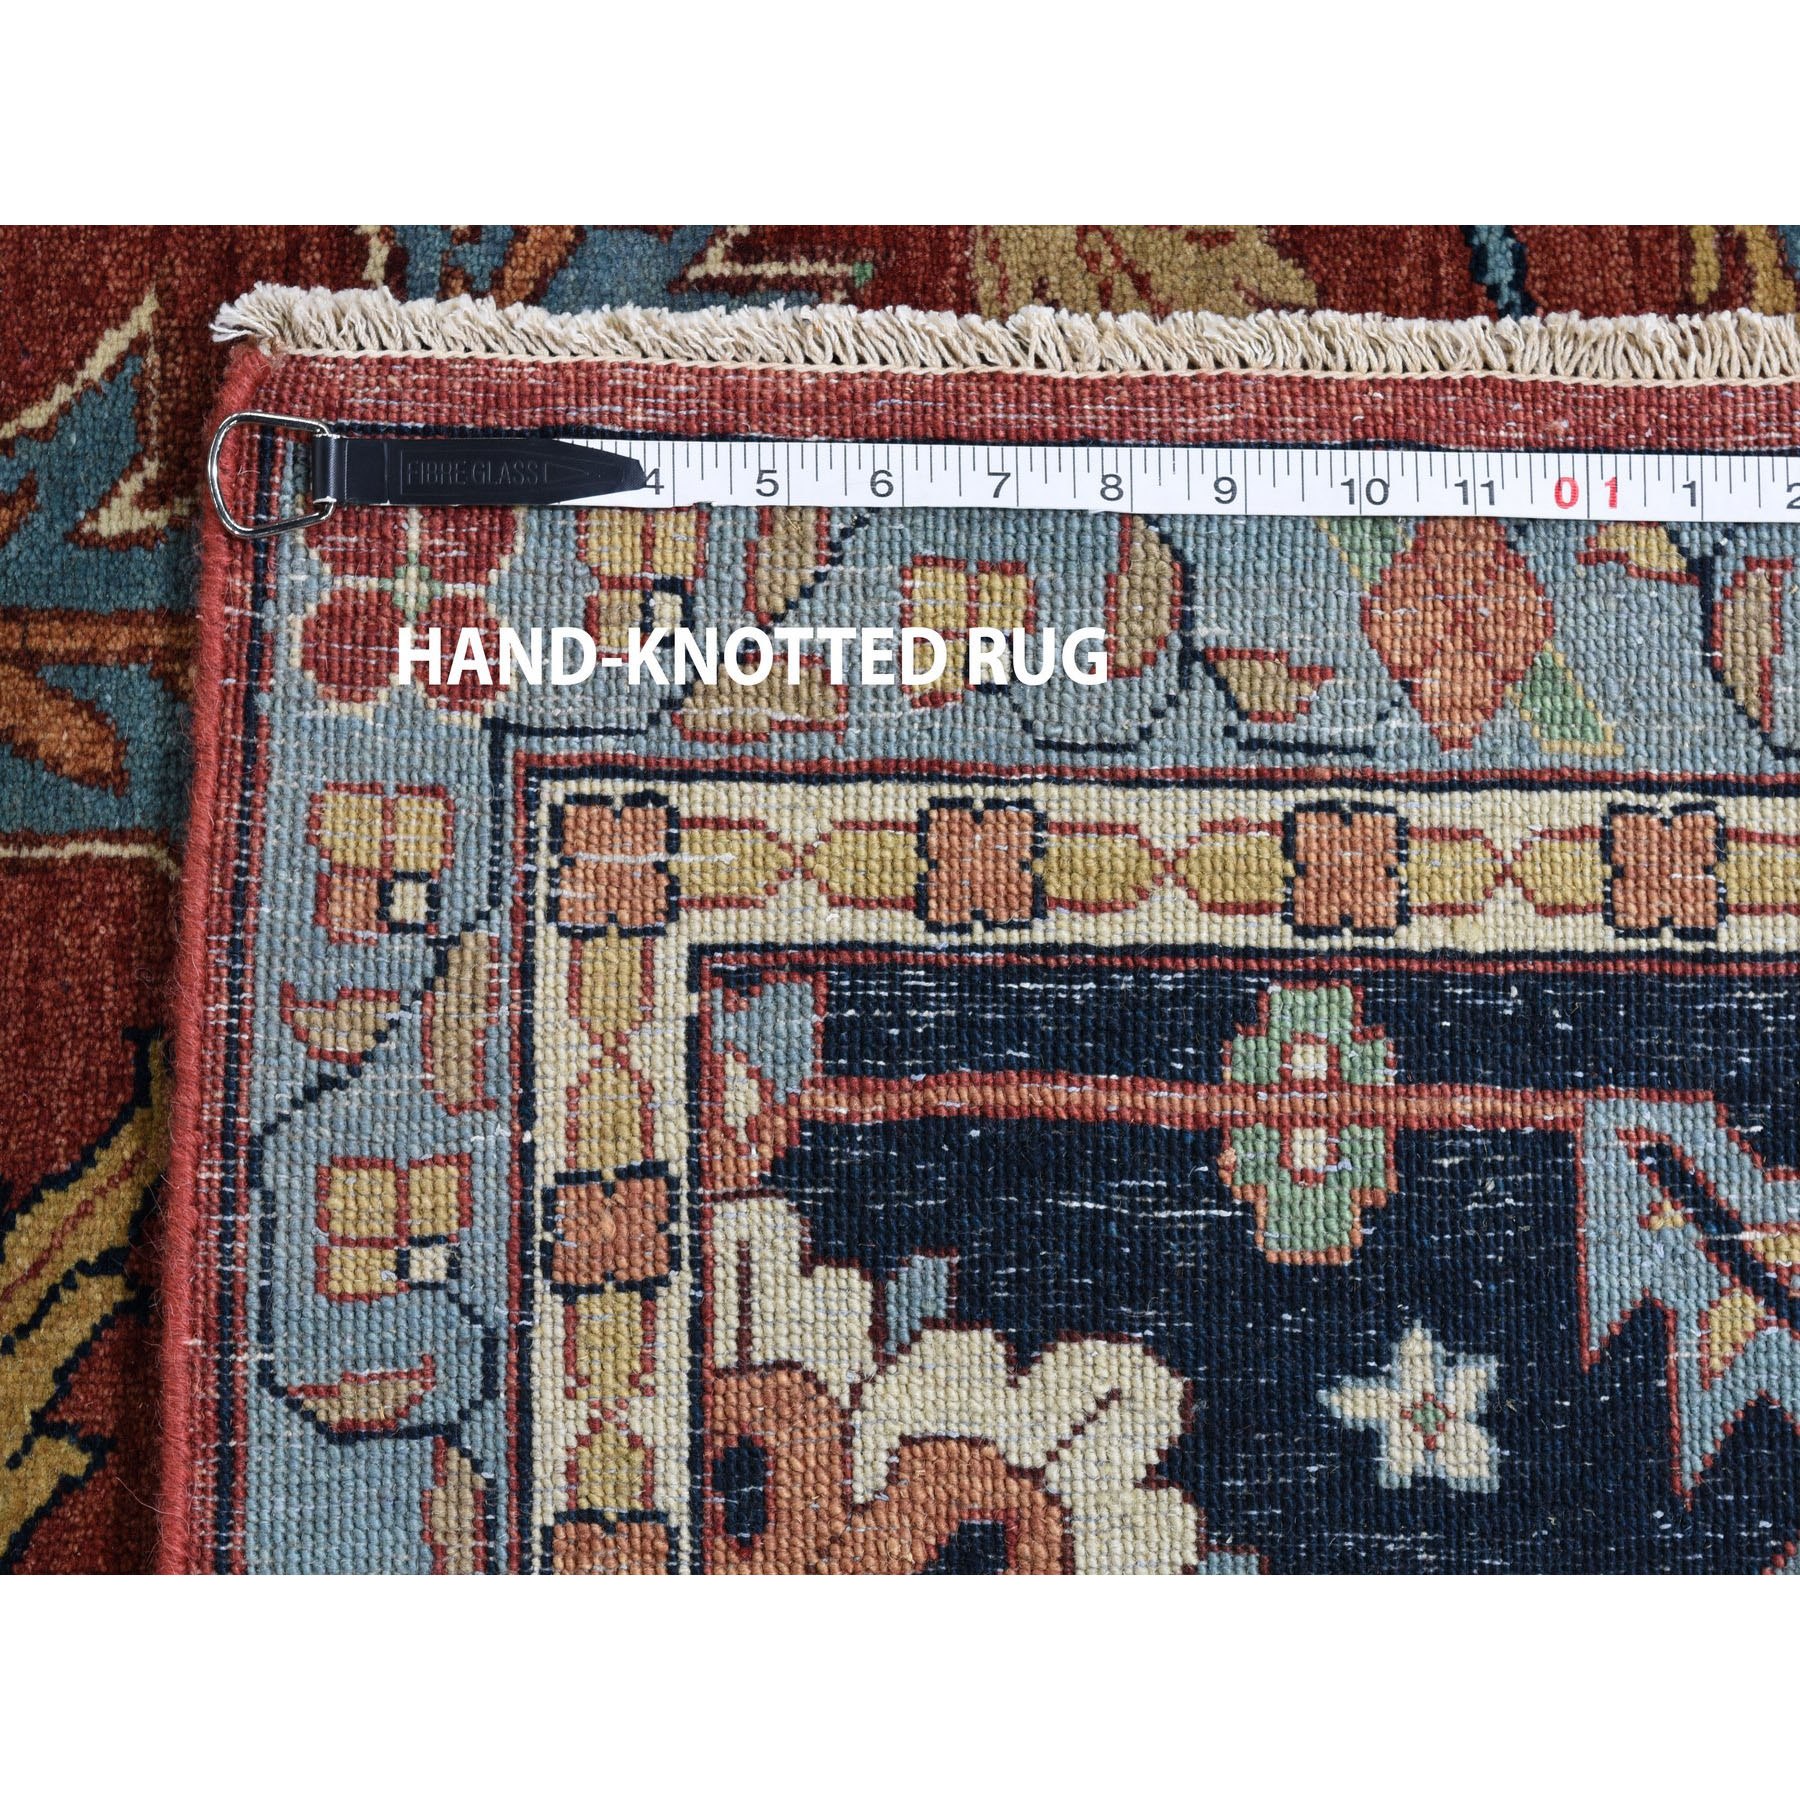 12-x17-9  Oversize Hand Knotted Antiqued Heriz Re-creation Pure Wool Oriental Rug 